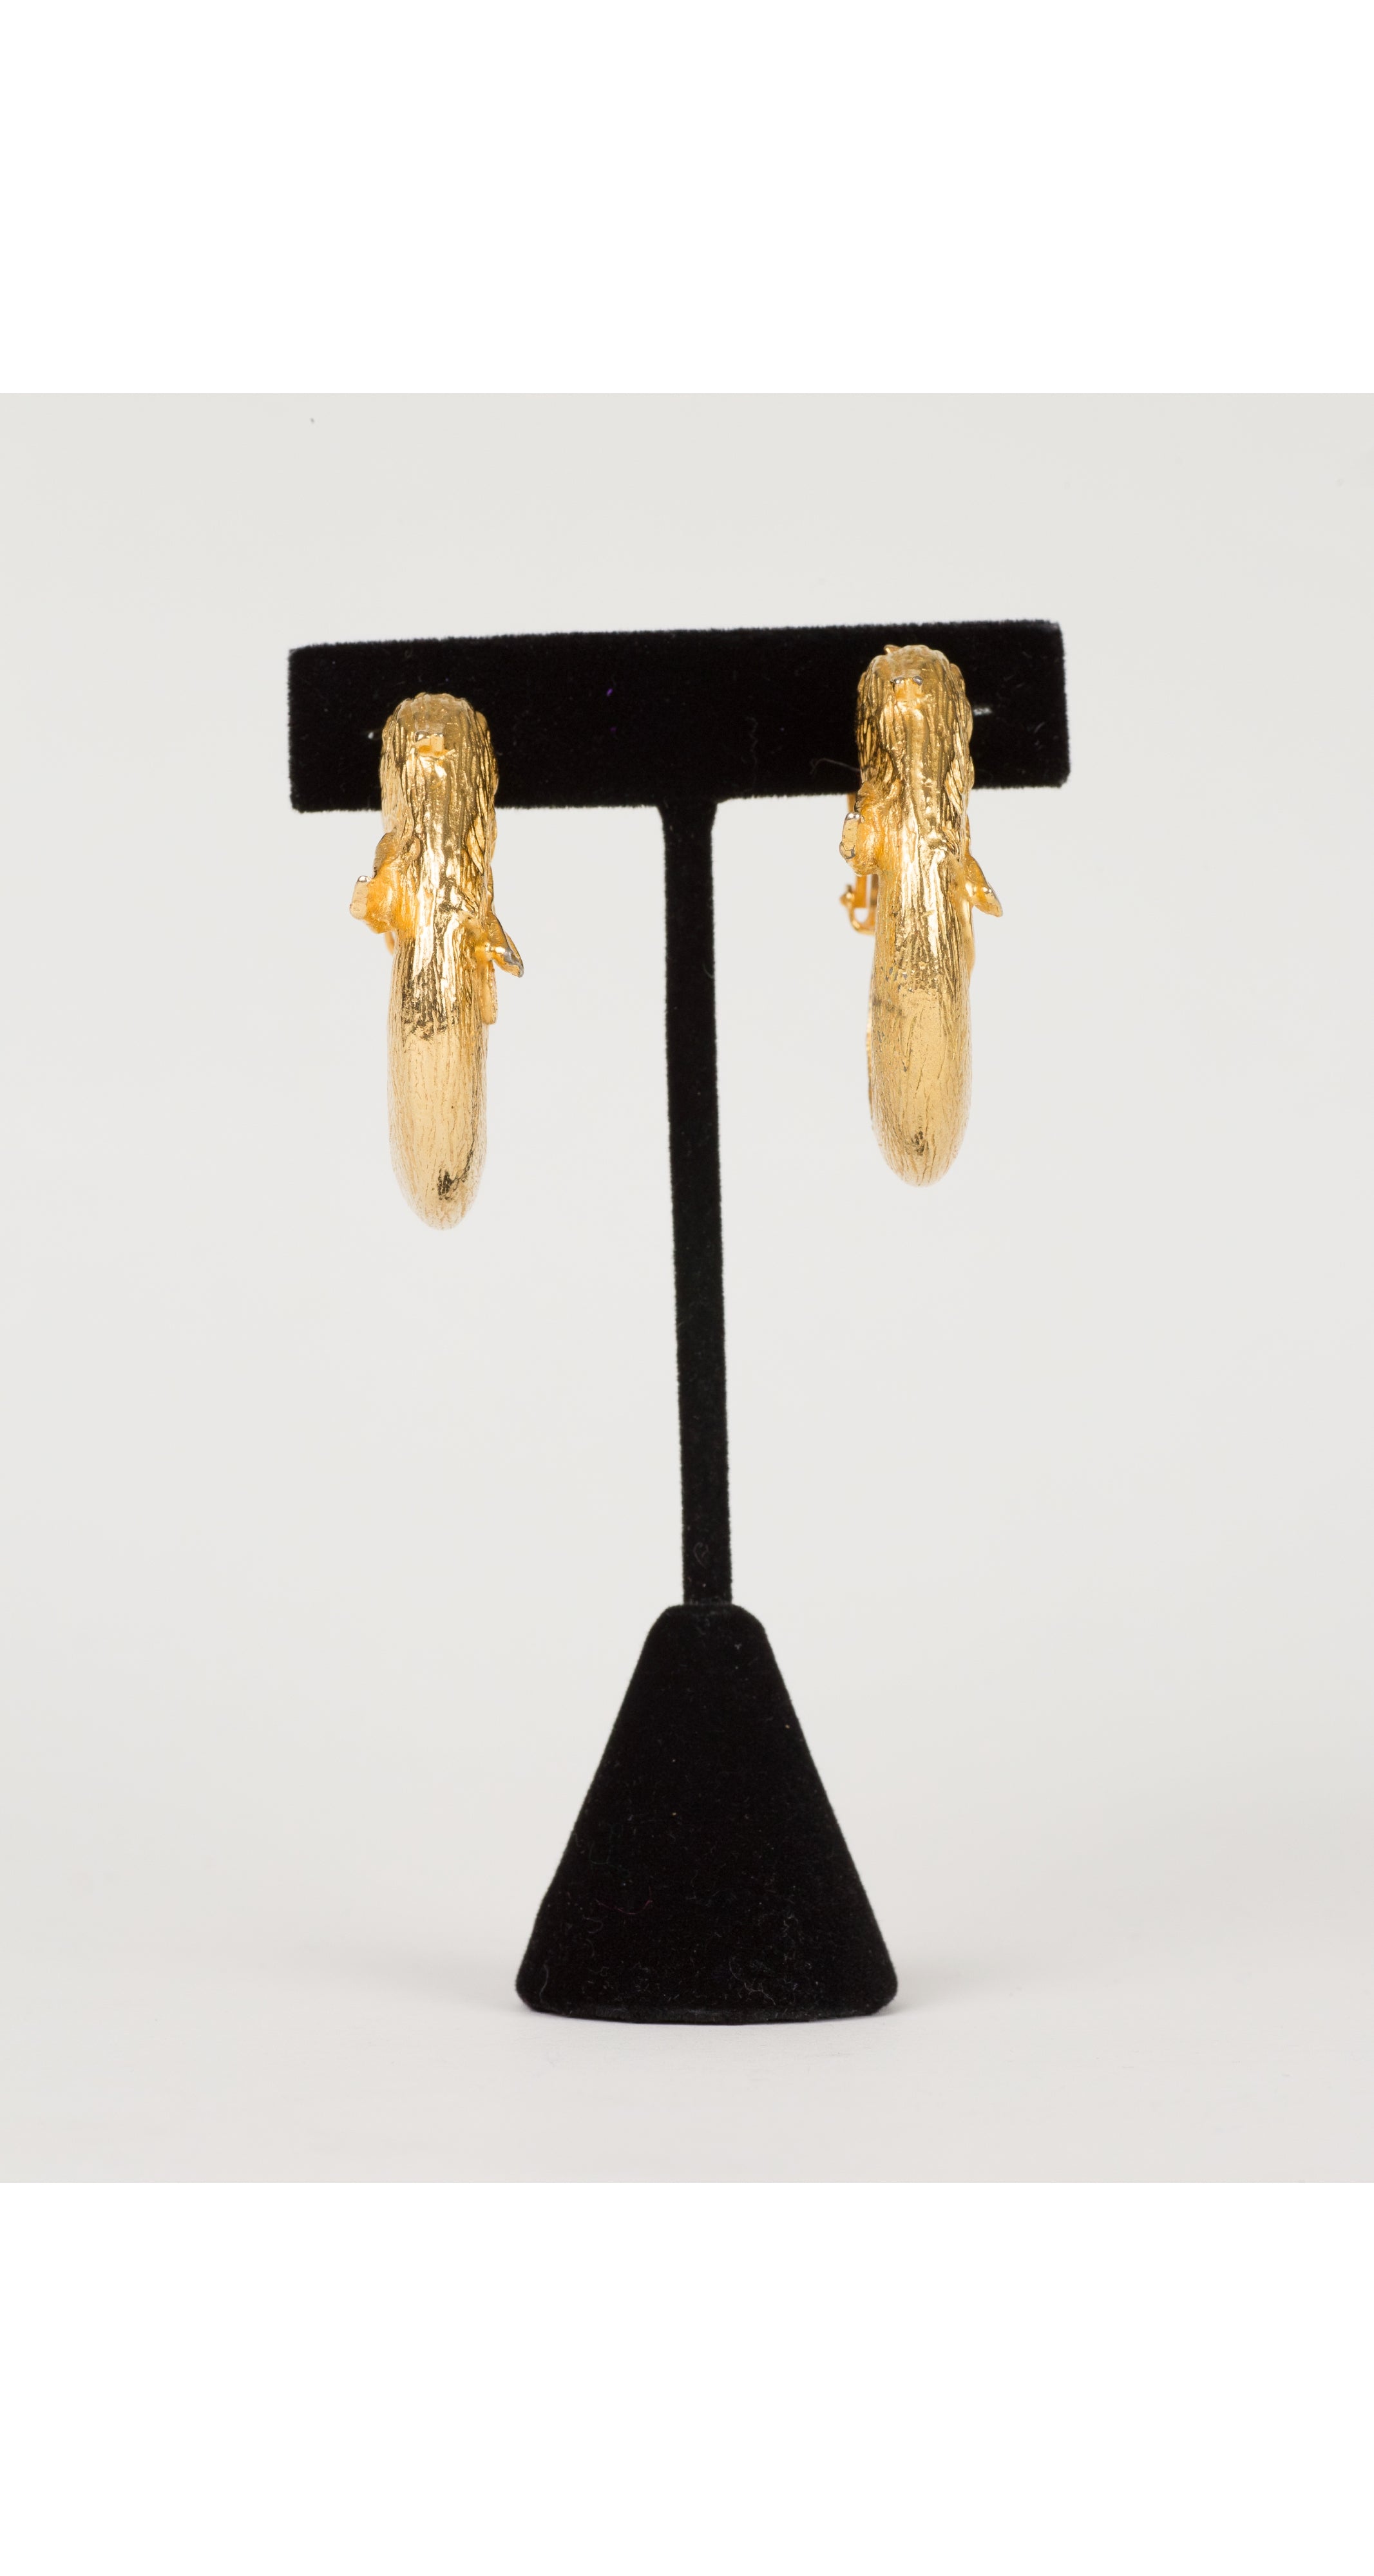 1960s Gold-Tone Fish Figural Clip-On Earrings